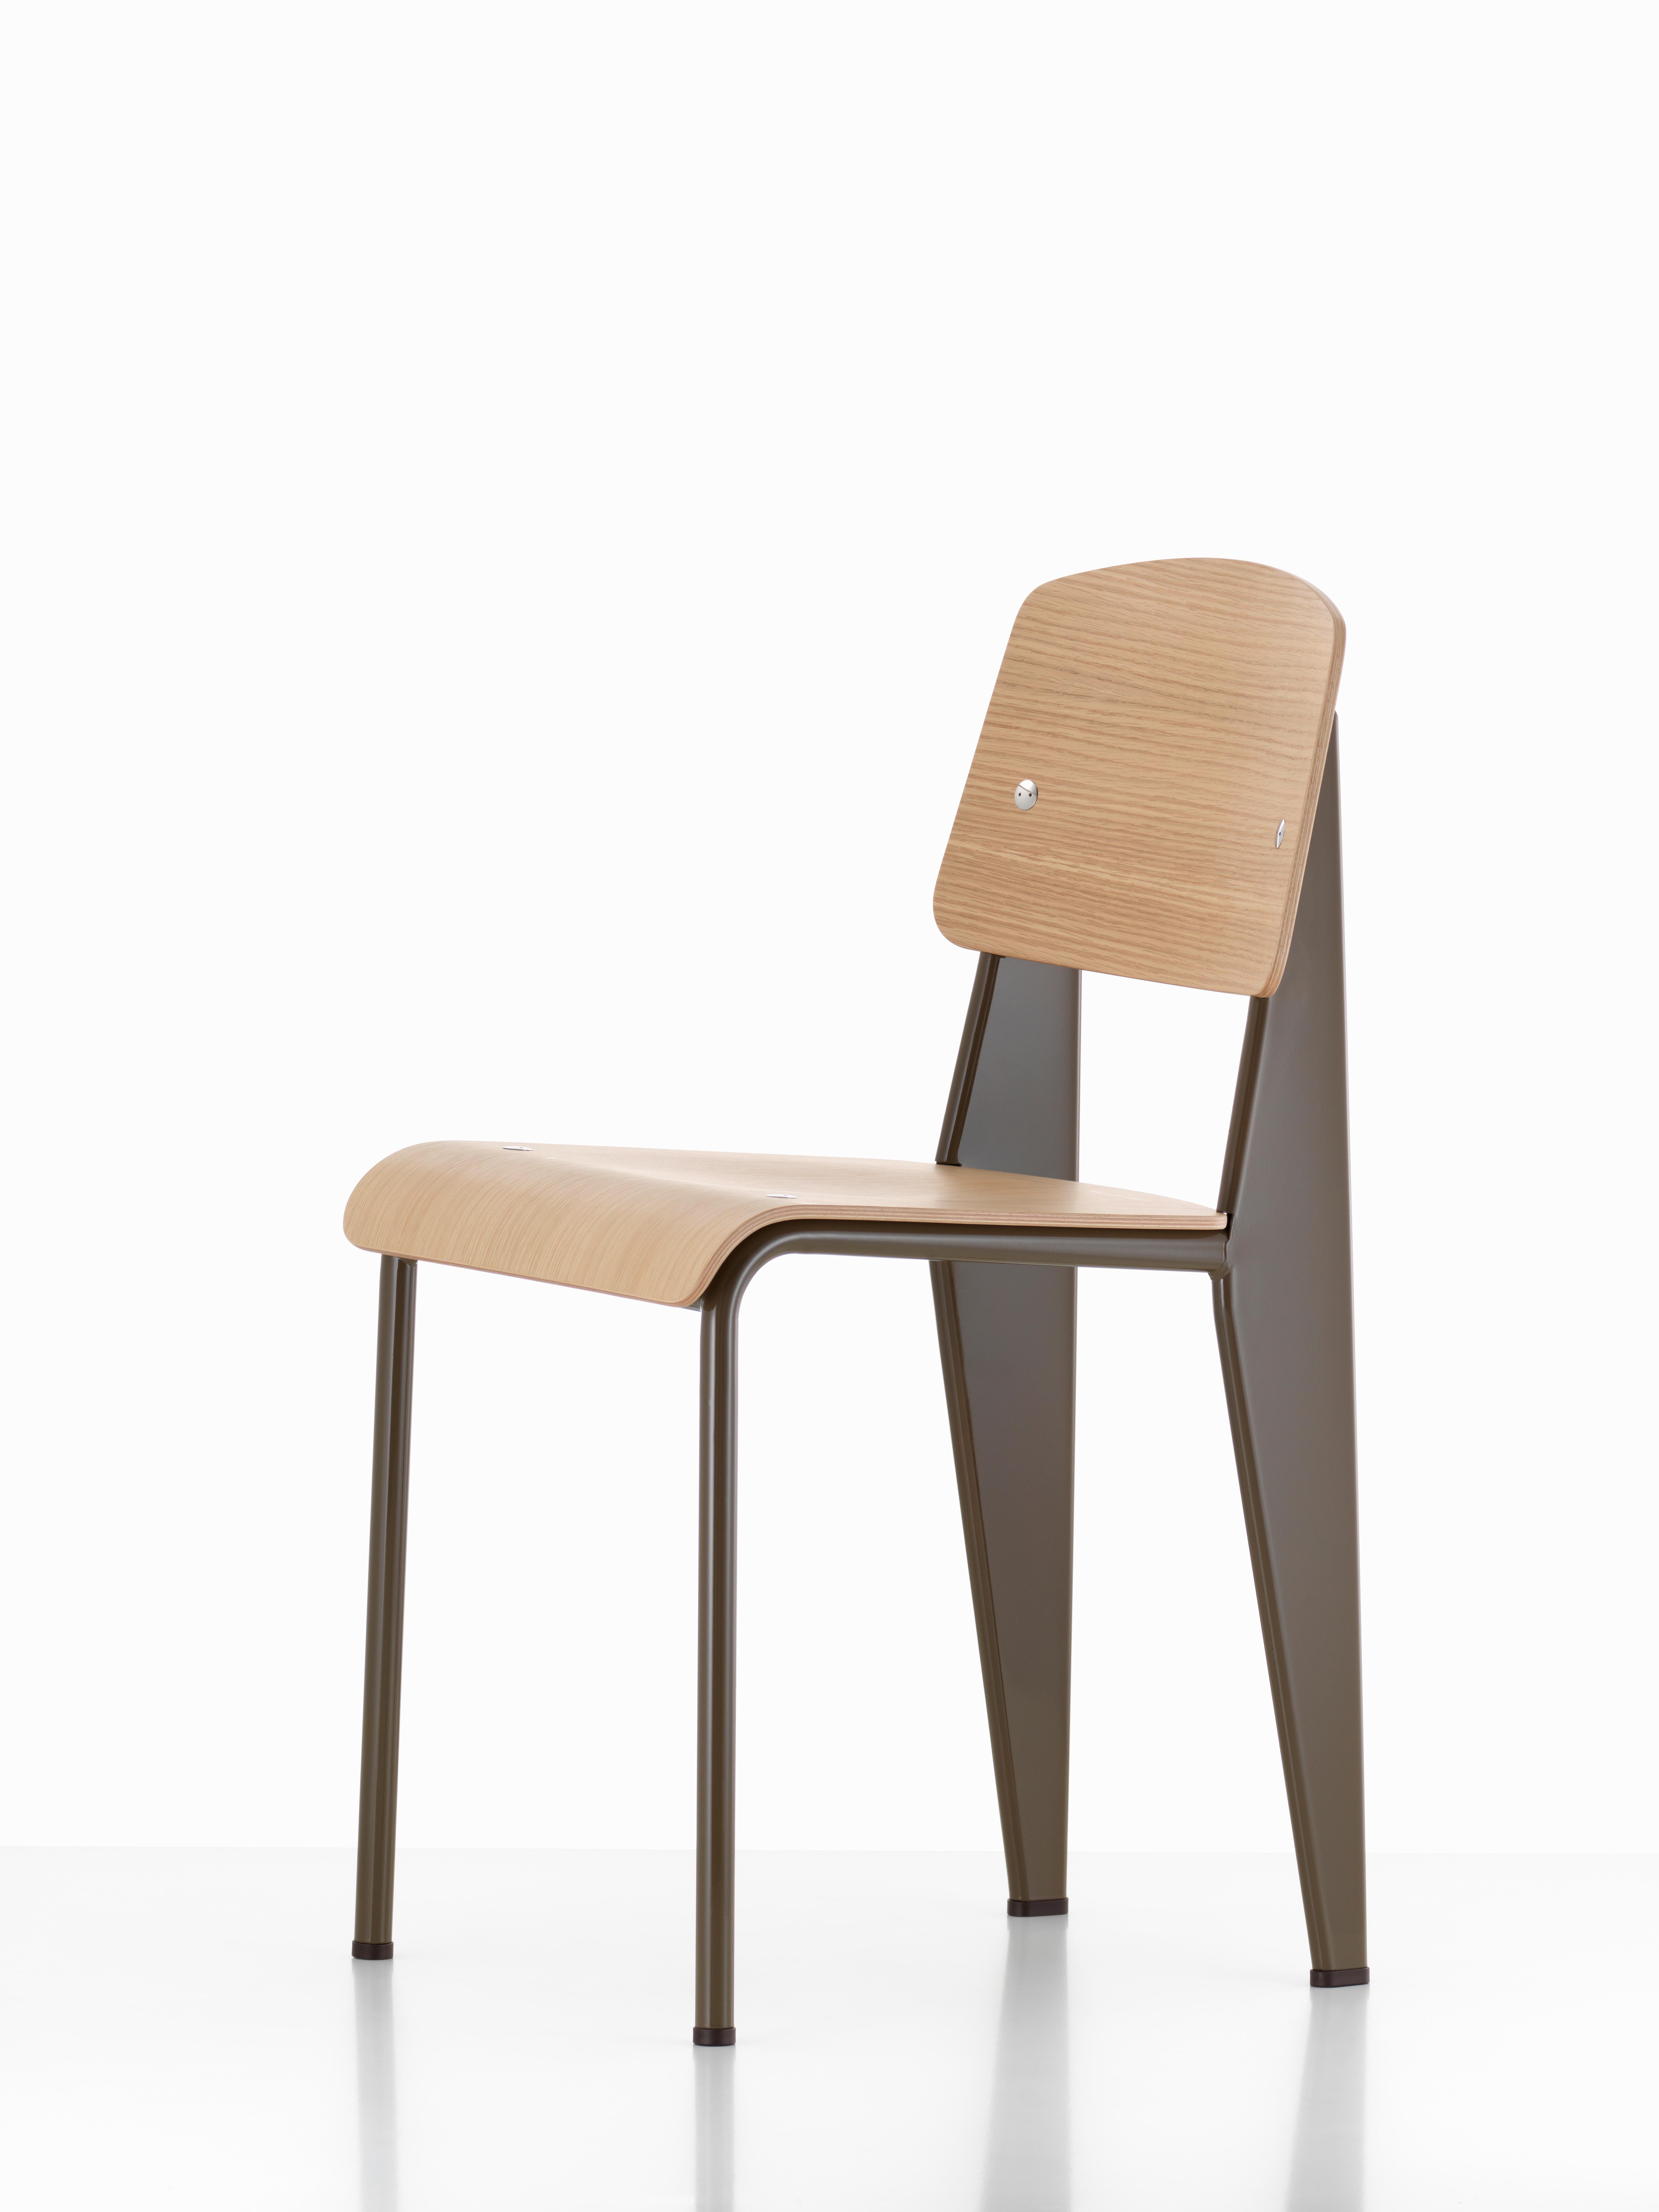 Jean Prouvé Standard Chair in Natural Oak and Black Metal for Vitra